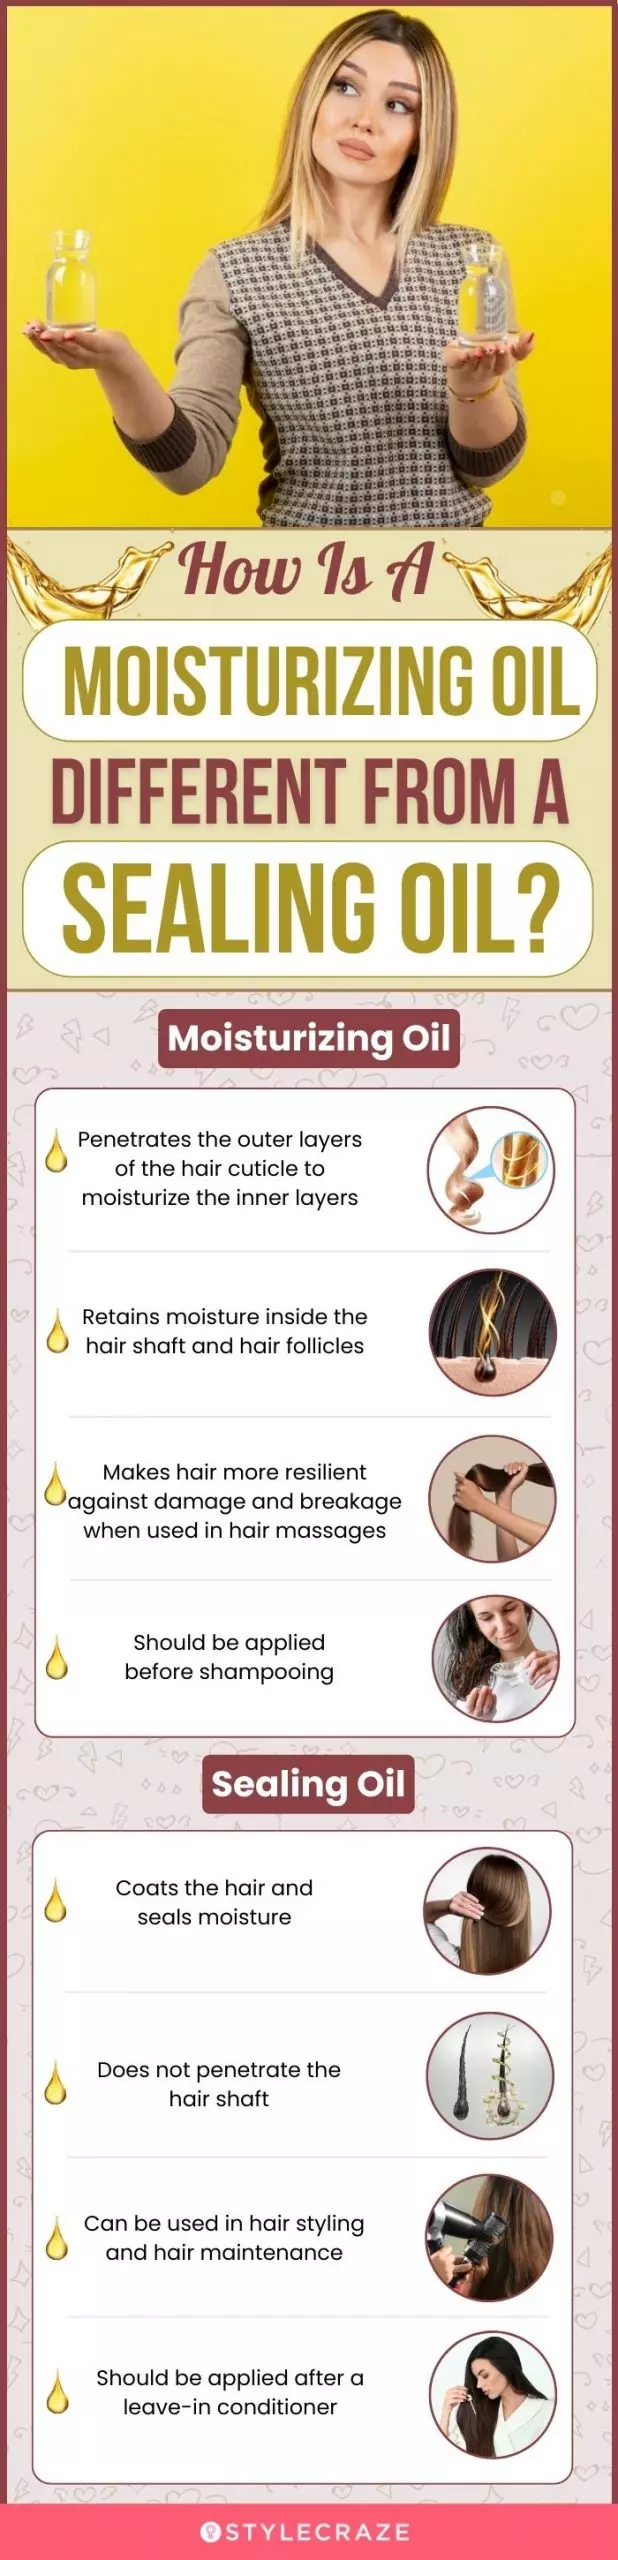 how is moisturizing oil different from a sealing oil (infographic)